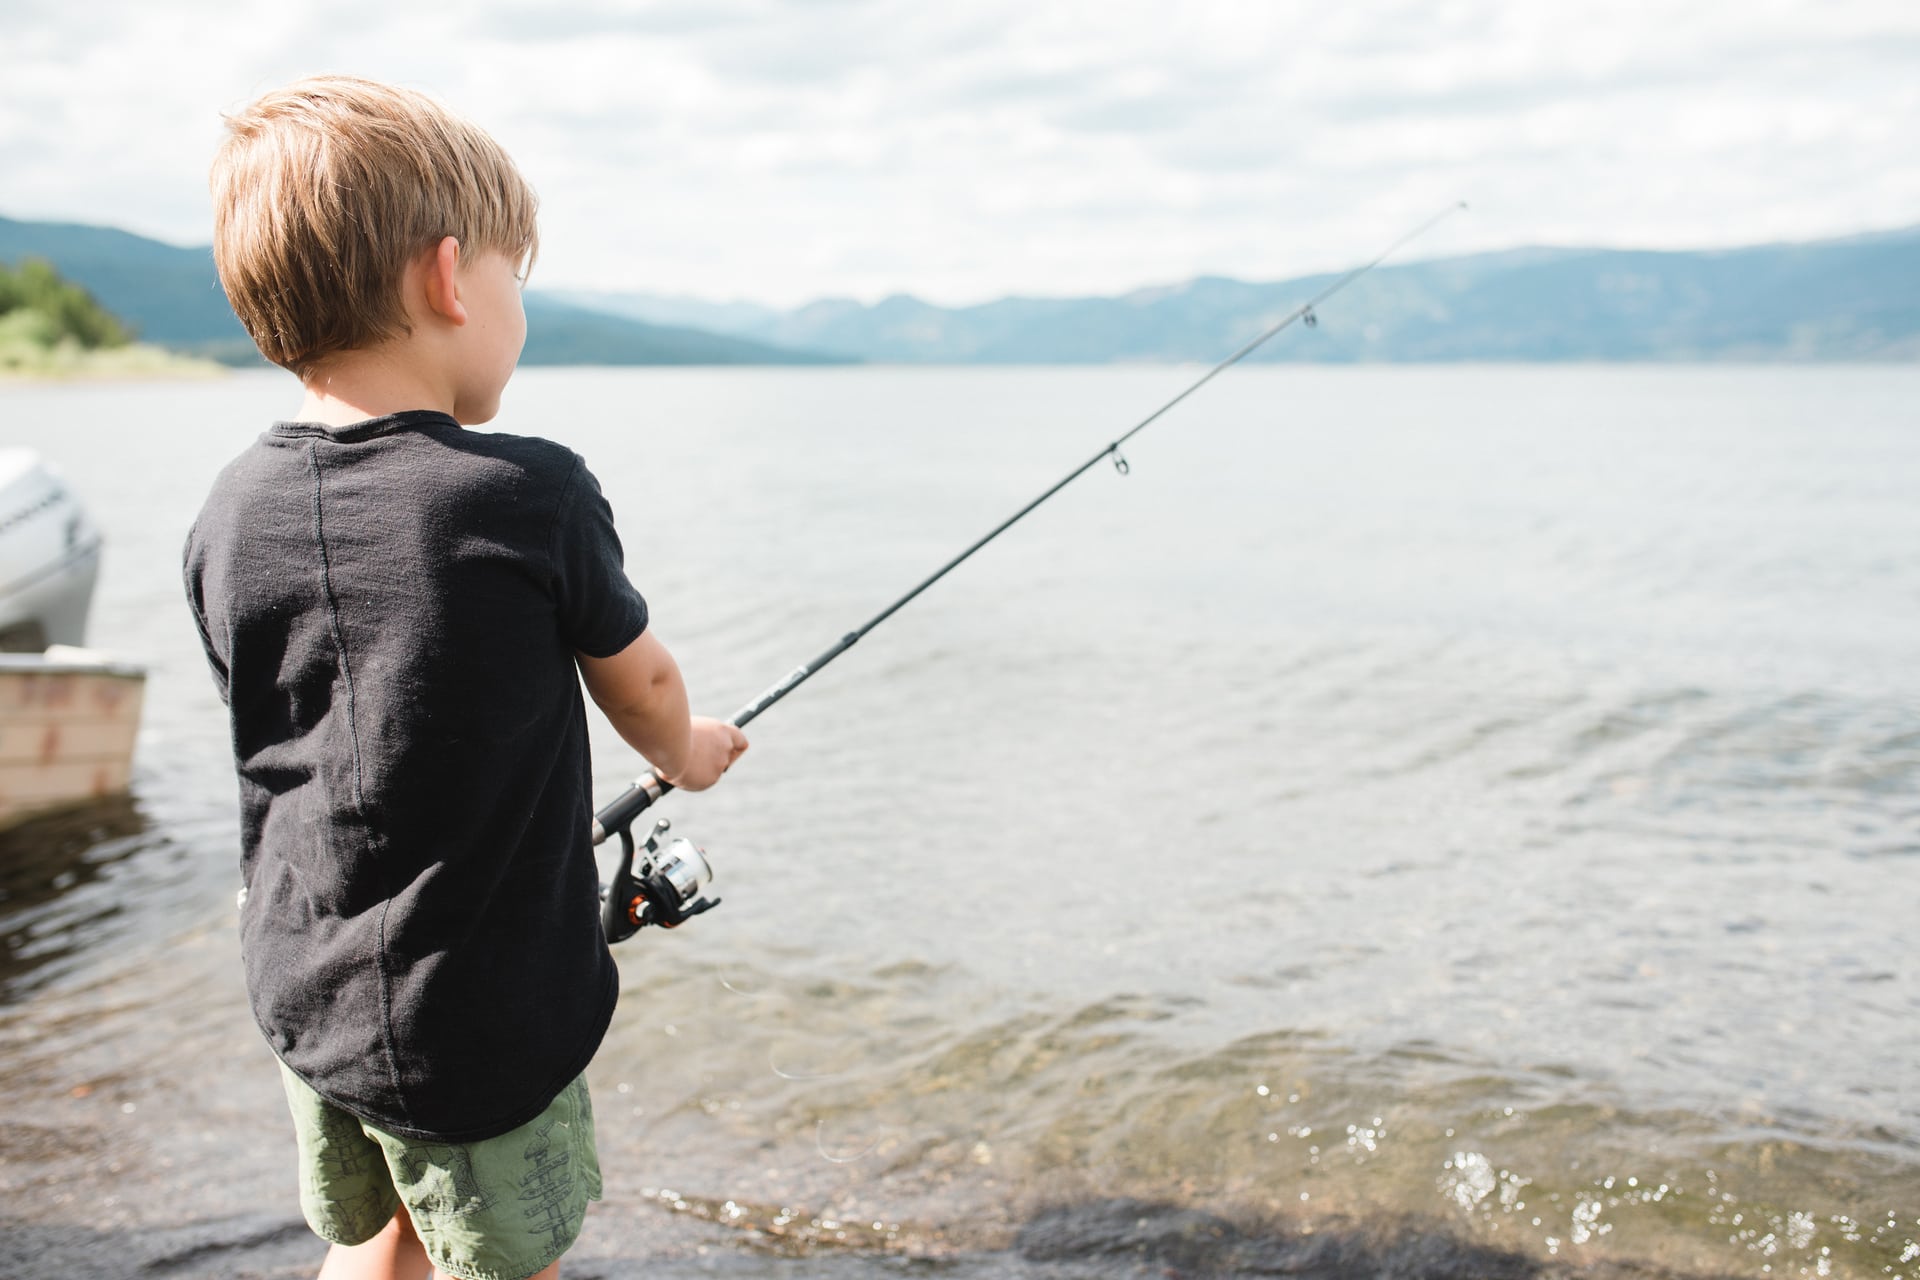 When catching a fish can mean both dinner and an invaluable lesson in resilience